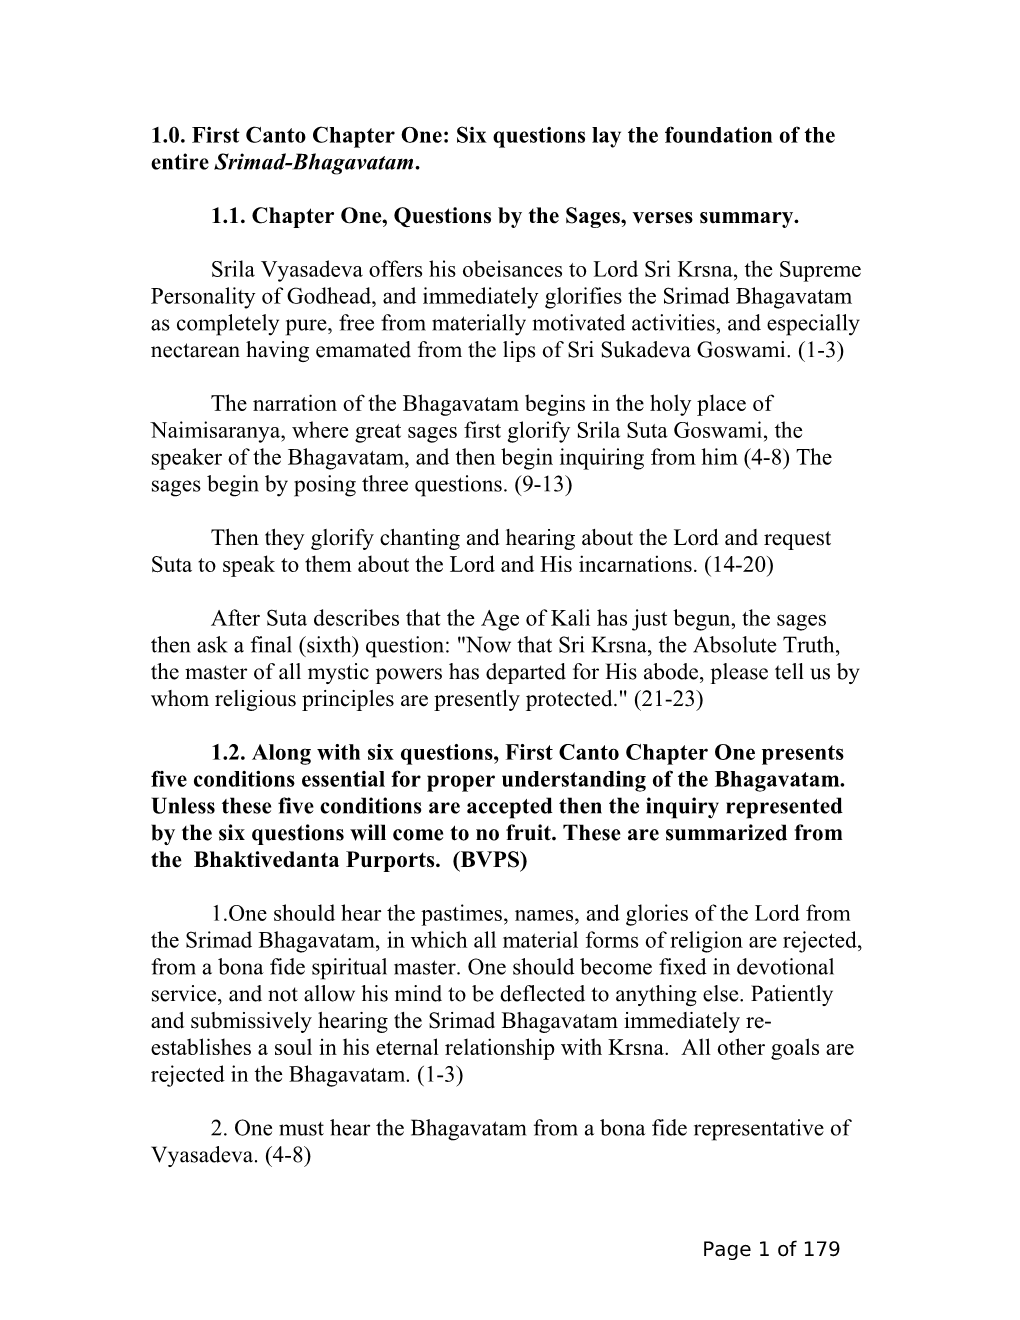 1.1. Chapter One, Questions by the Sages, Verses Summary